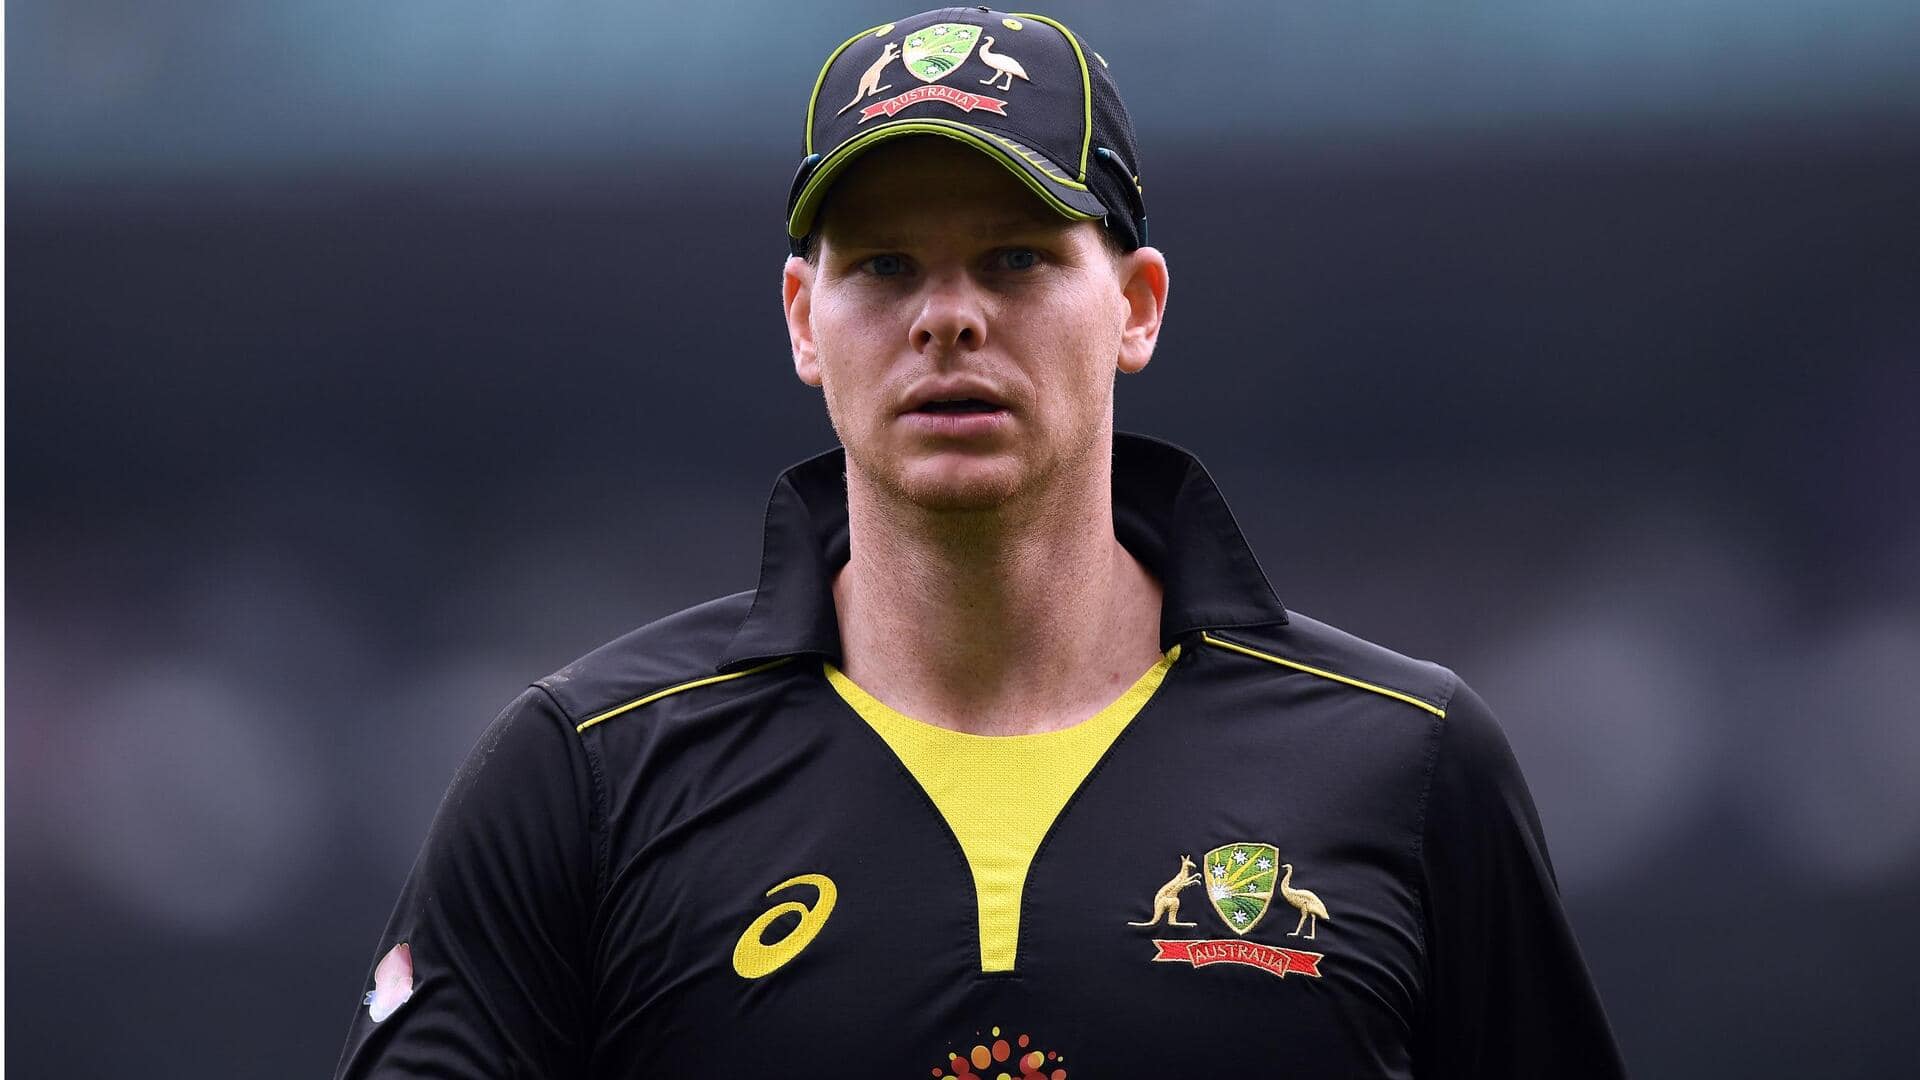 Decoding Steve Smith's stats as opener in T20 cricket